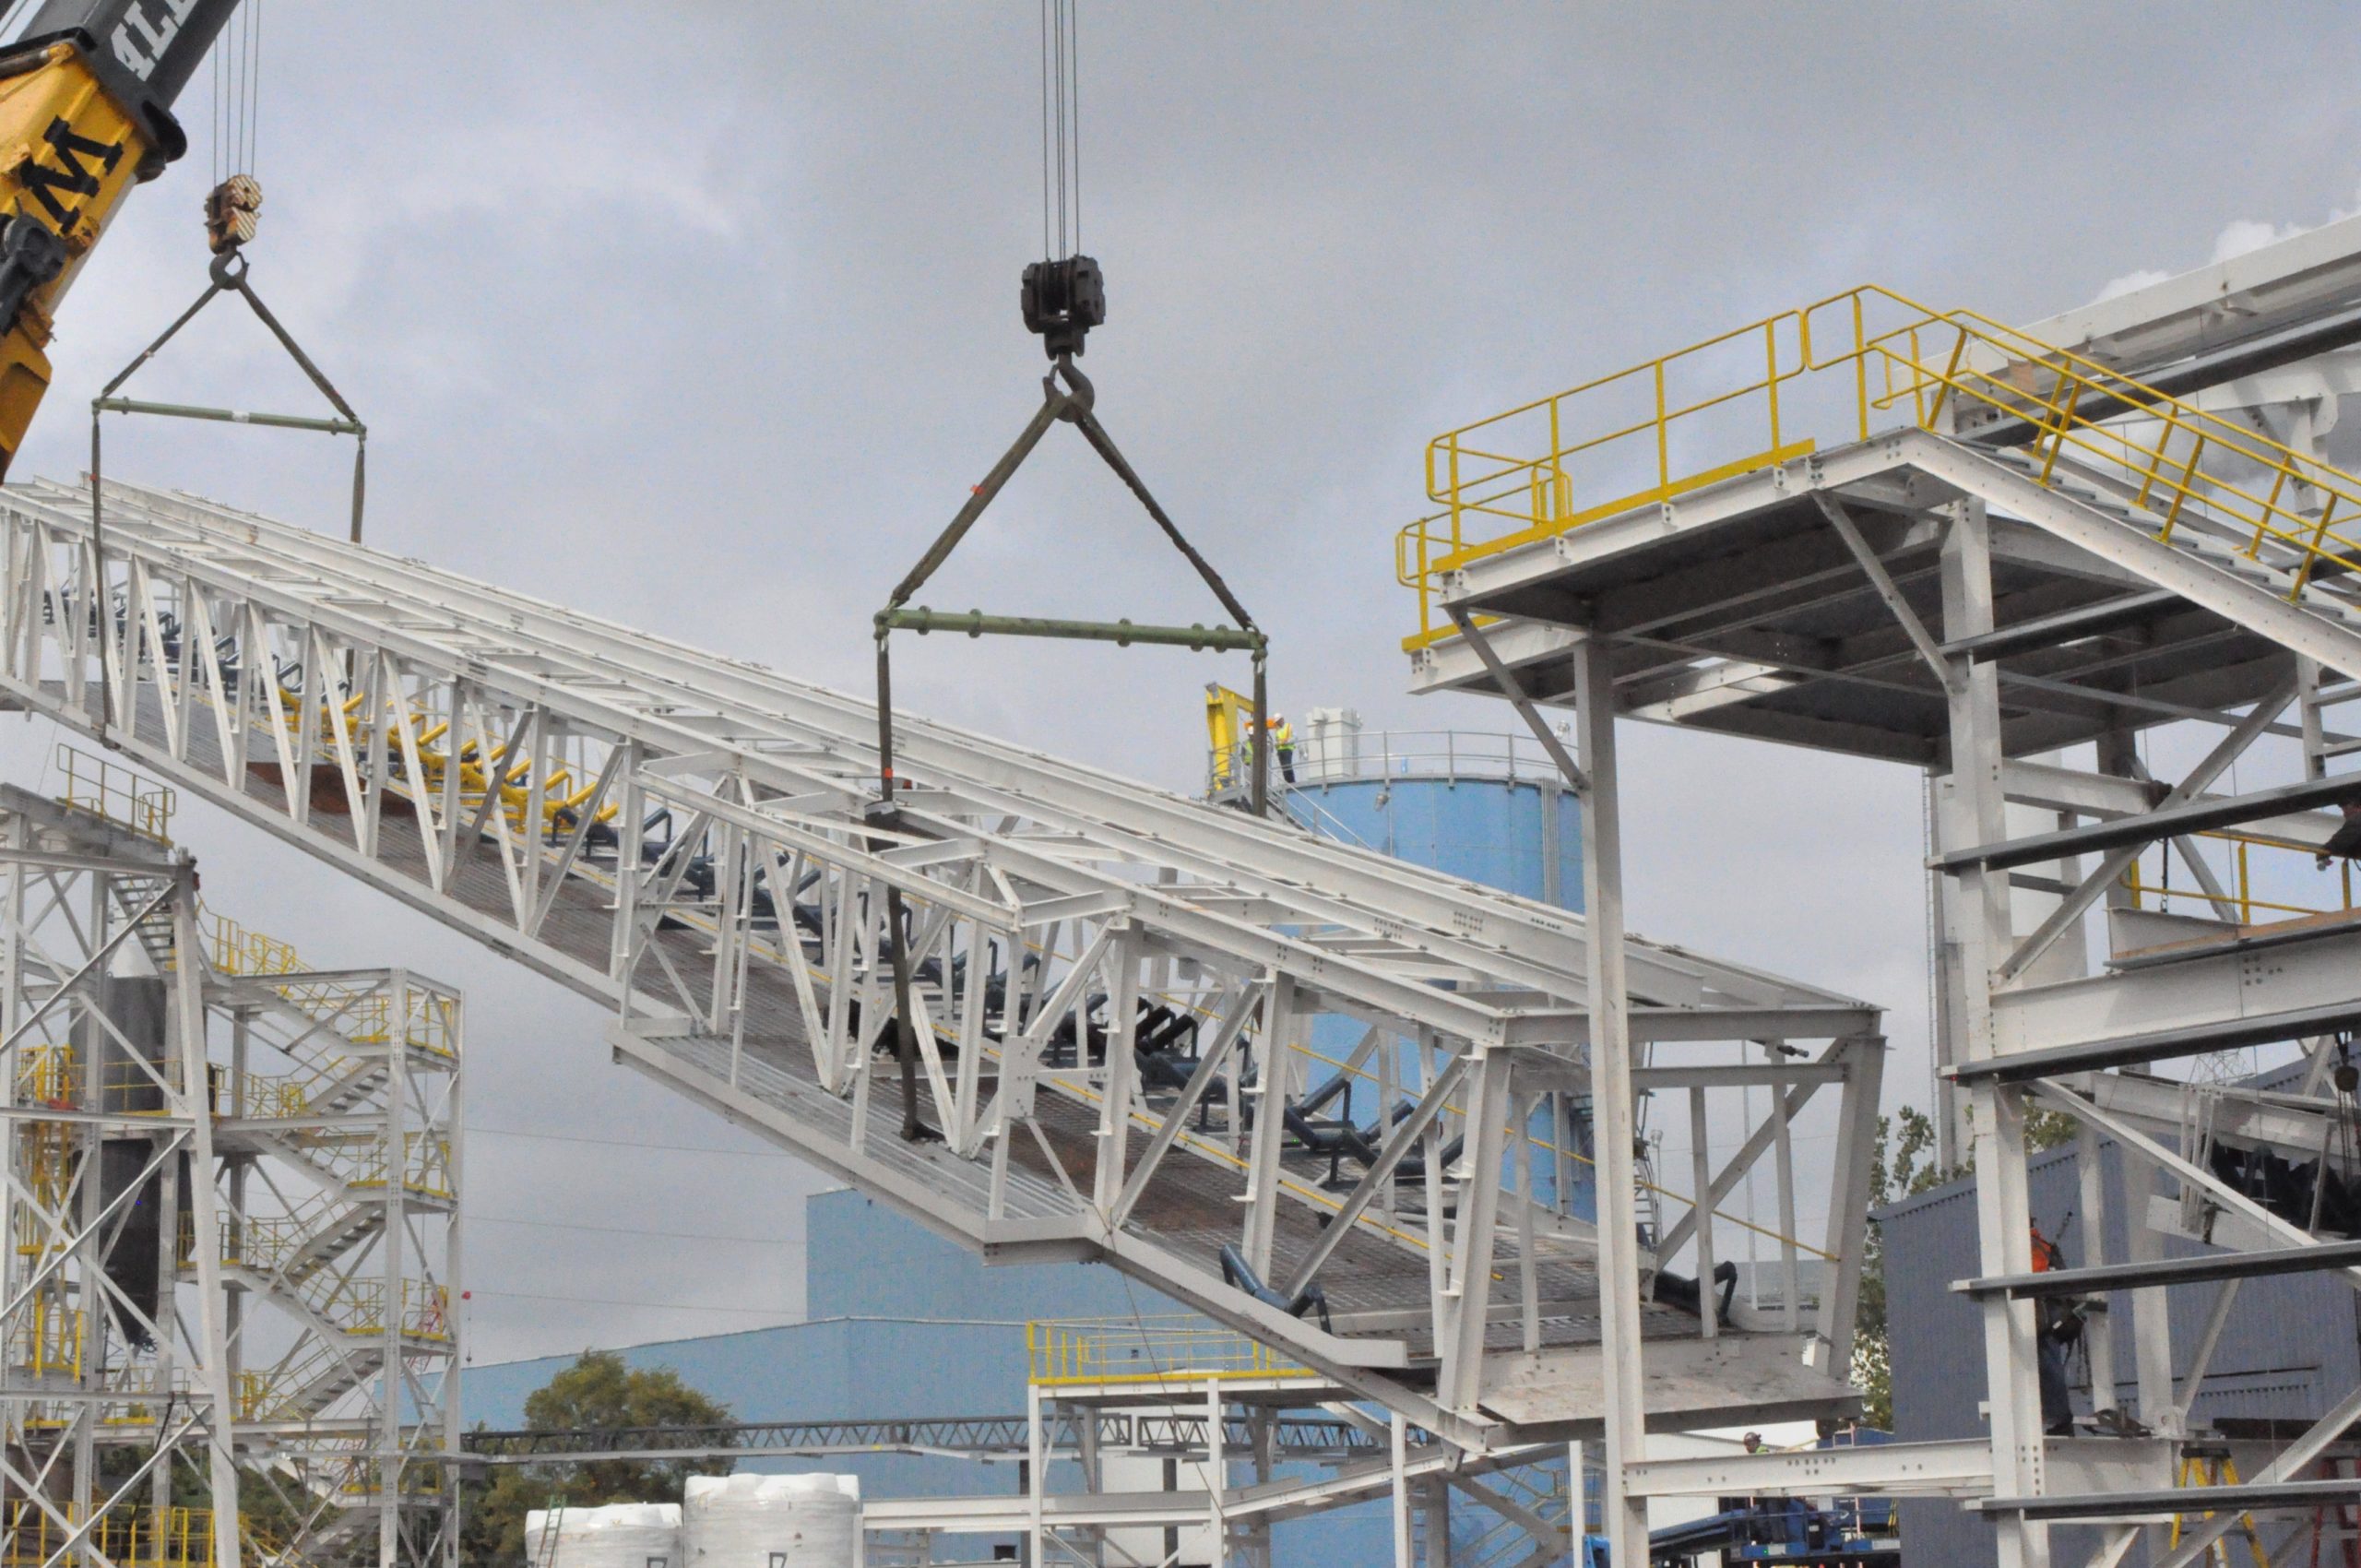 Preassembled conveyor and structural frame installation